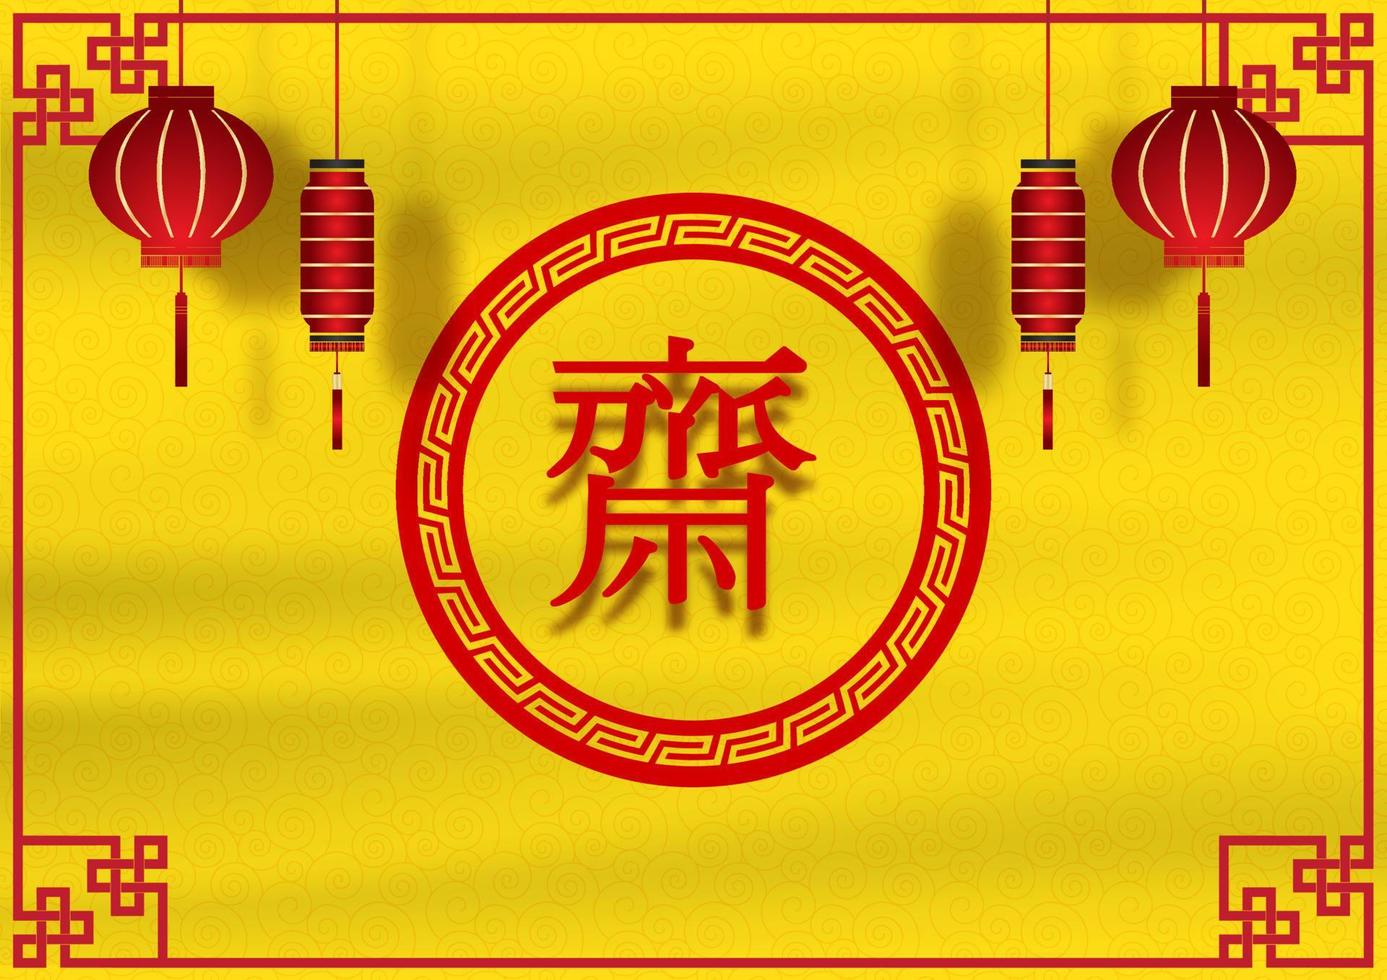 Chinese lanterns with decorated on big red Chinese letters and yellow flag background. Chinese vegan festival in flag design and Red Chinese letters means Fasting for worship Buddha in English. vector